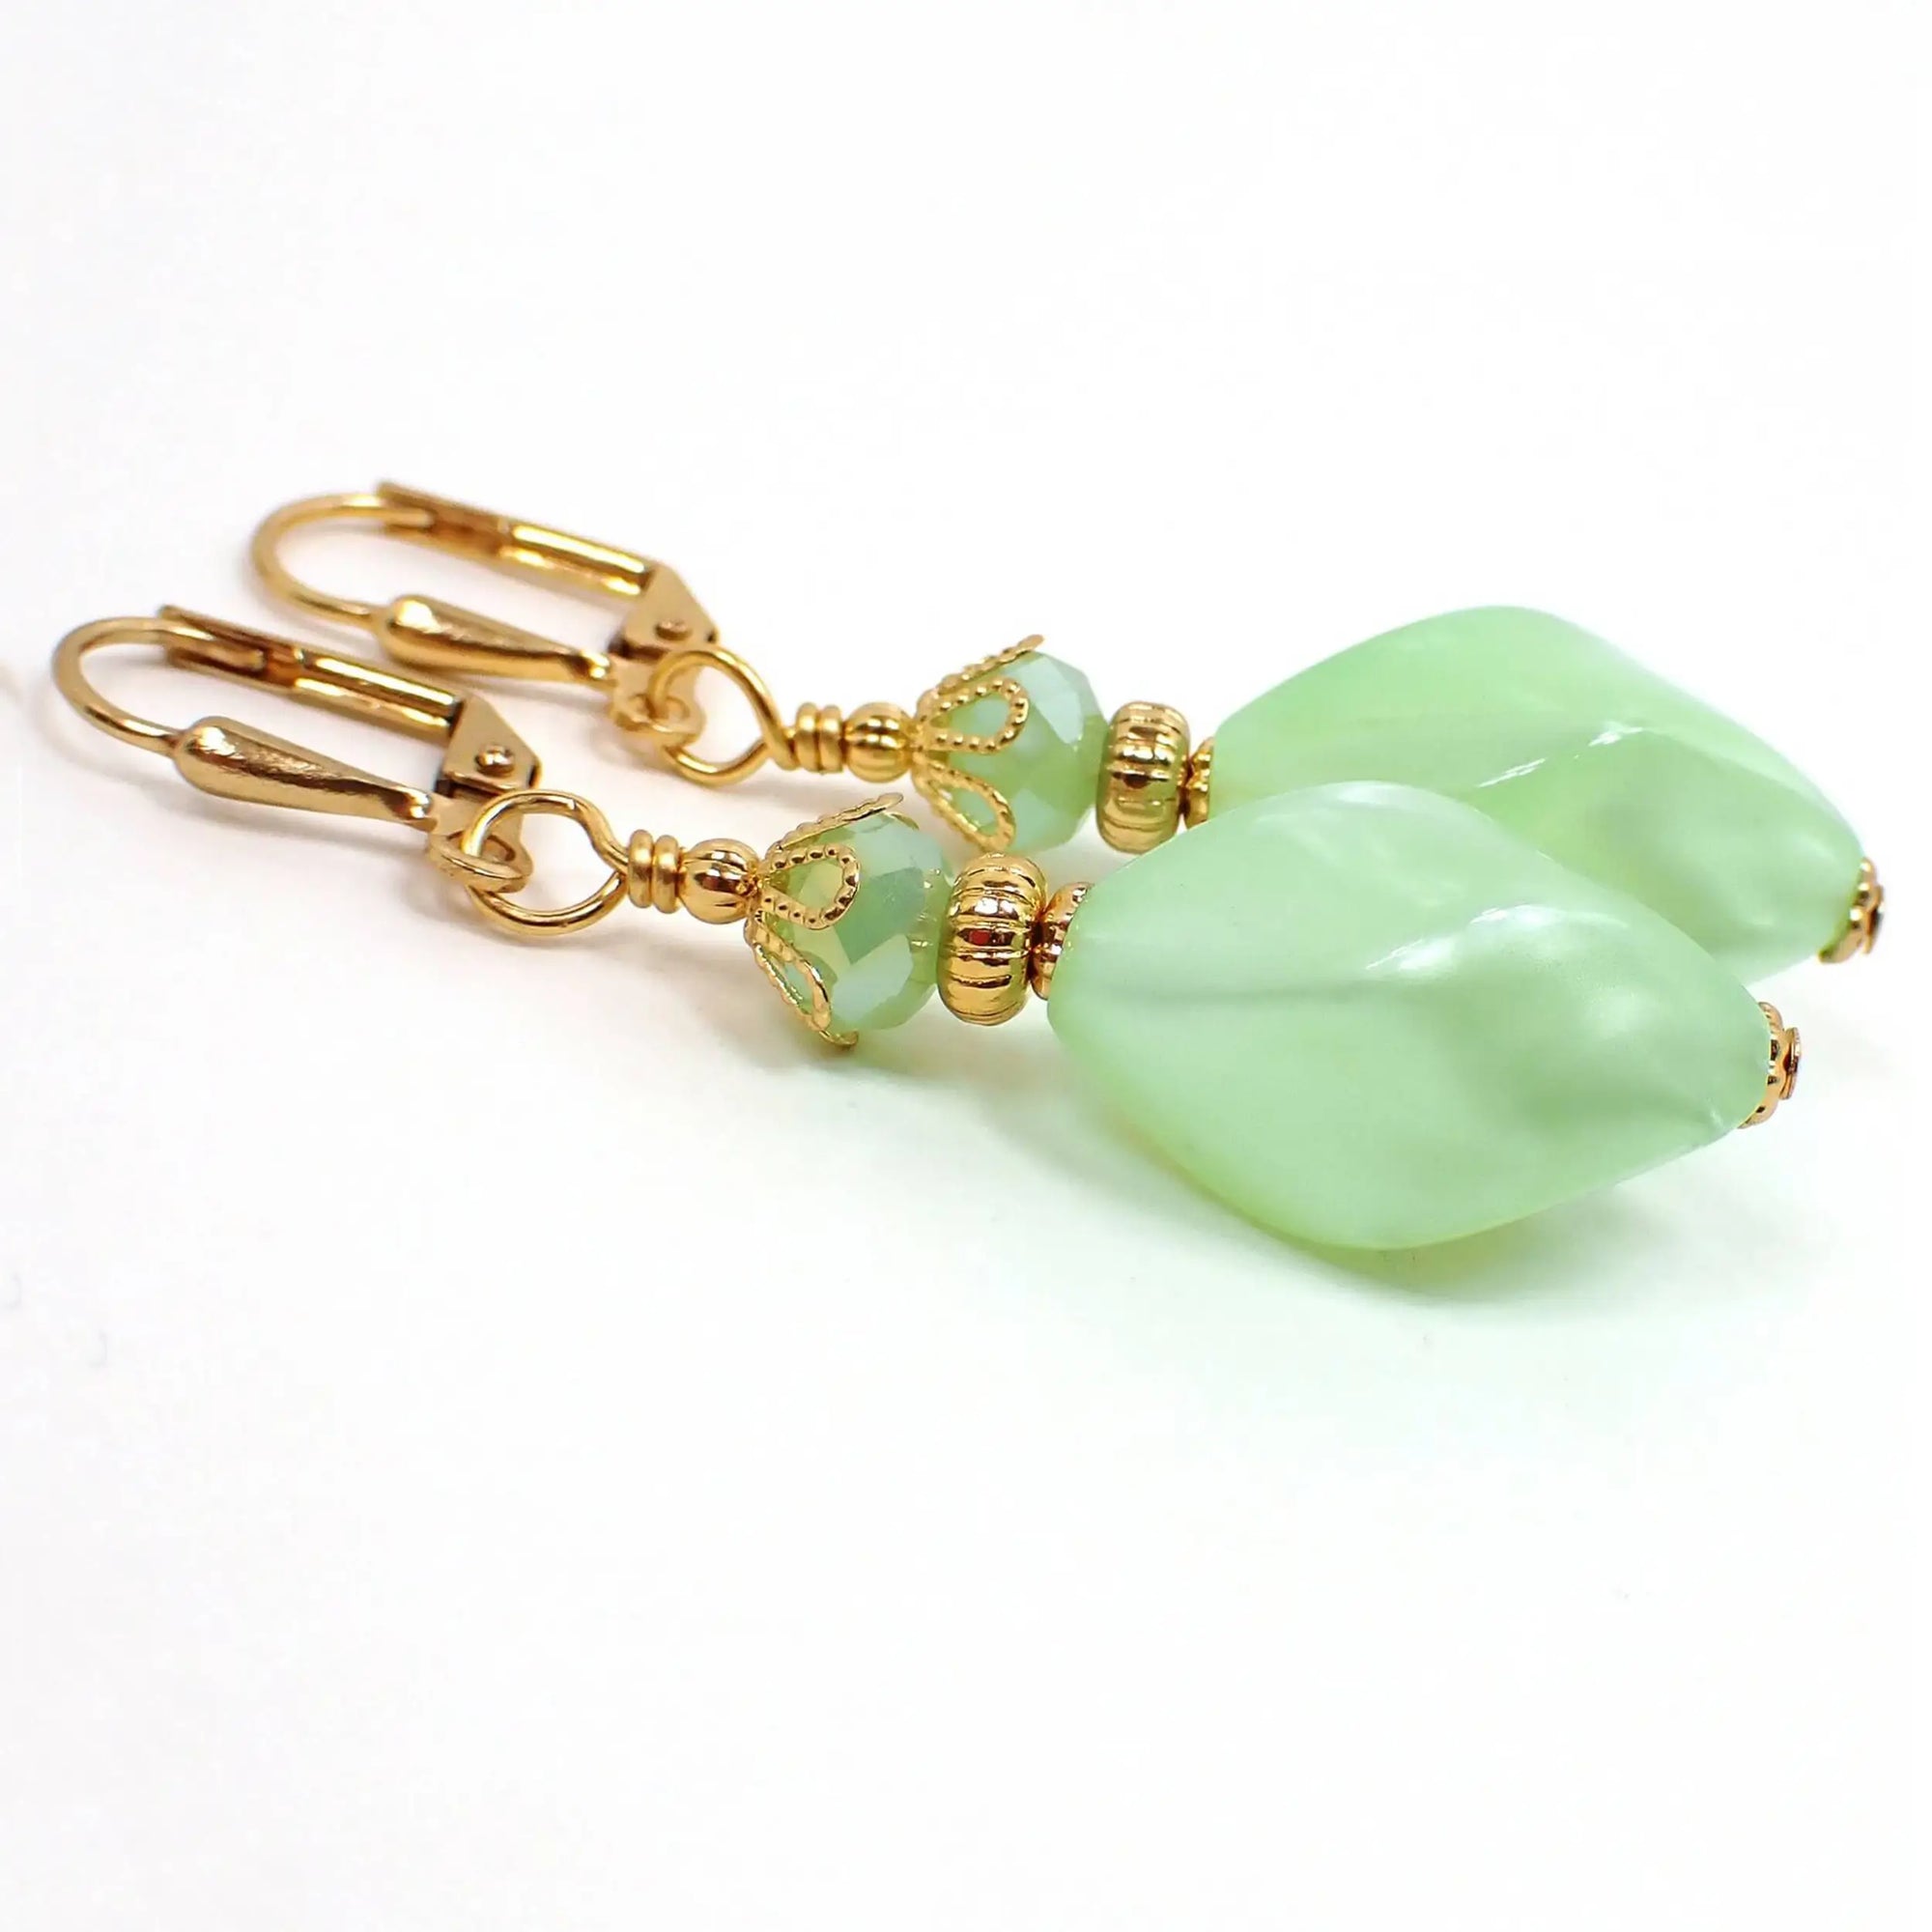 Angled view of the handmade twist drop earrings with vintage lucite beds. The metal is gold plated in color. There are new faceted light green glass beads at the top. The bottom lucite beads are pearly light green in color and have an angled twist like design.